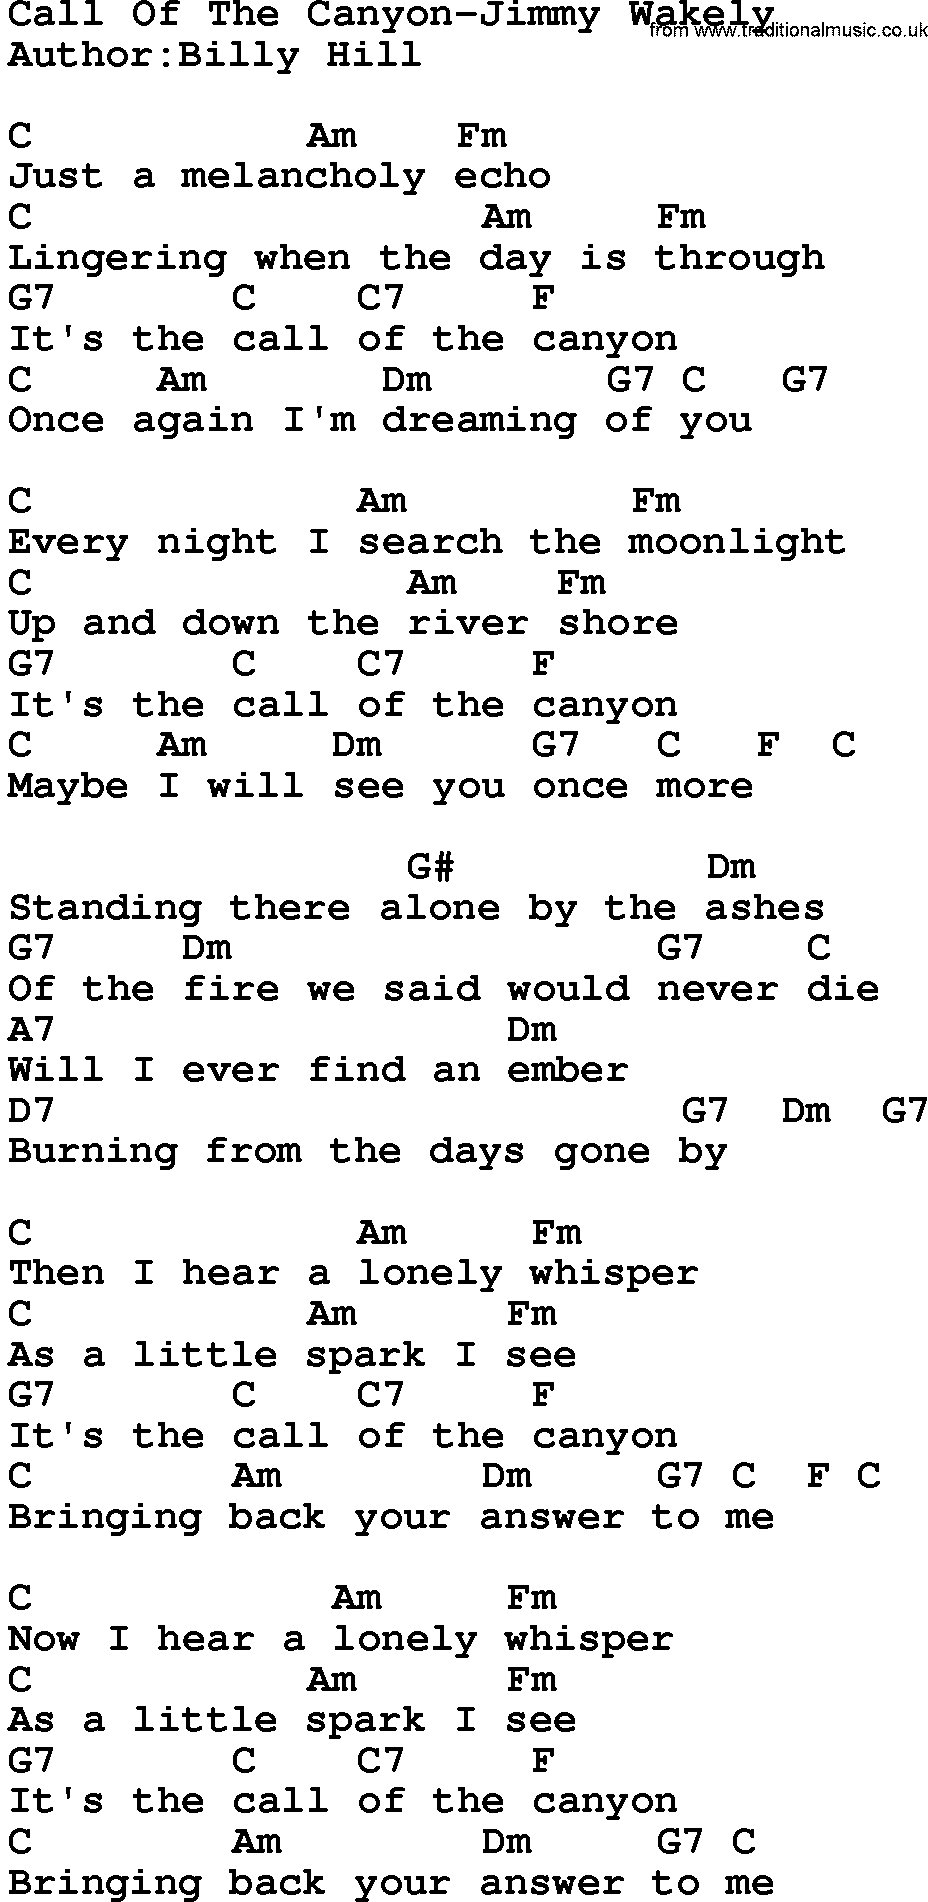 Country music song: Call Of The Canyon-Jimmy Wakely lyrics and chords